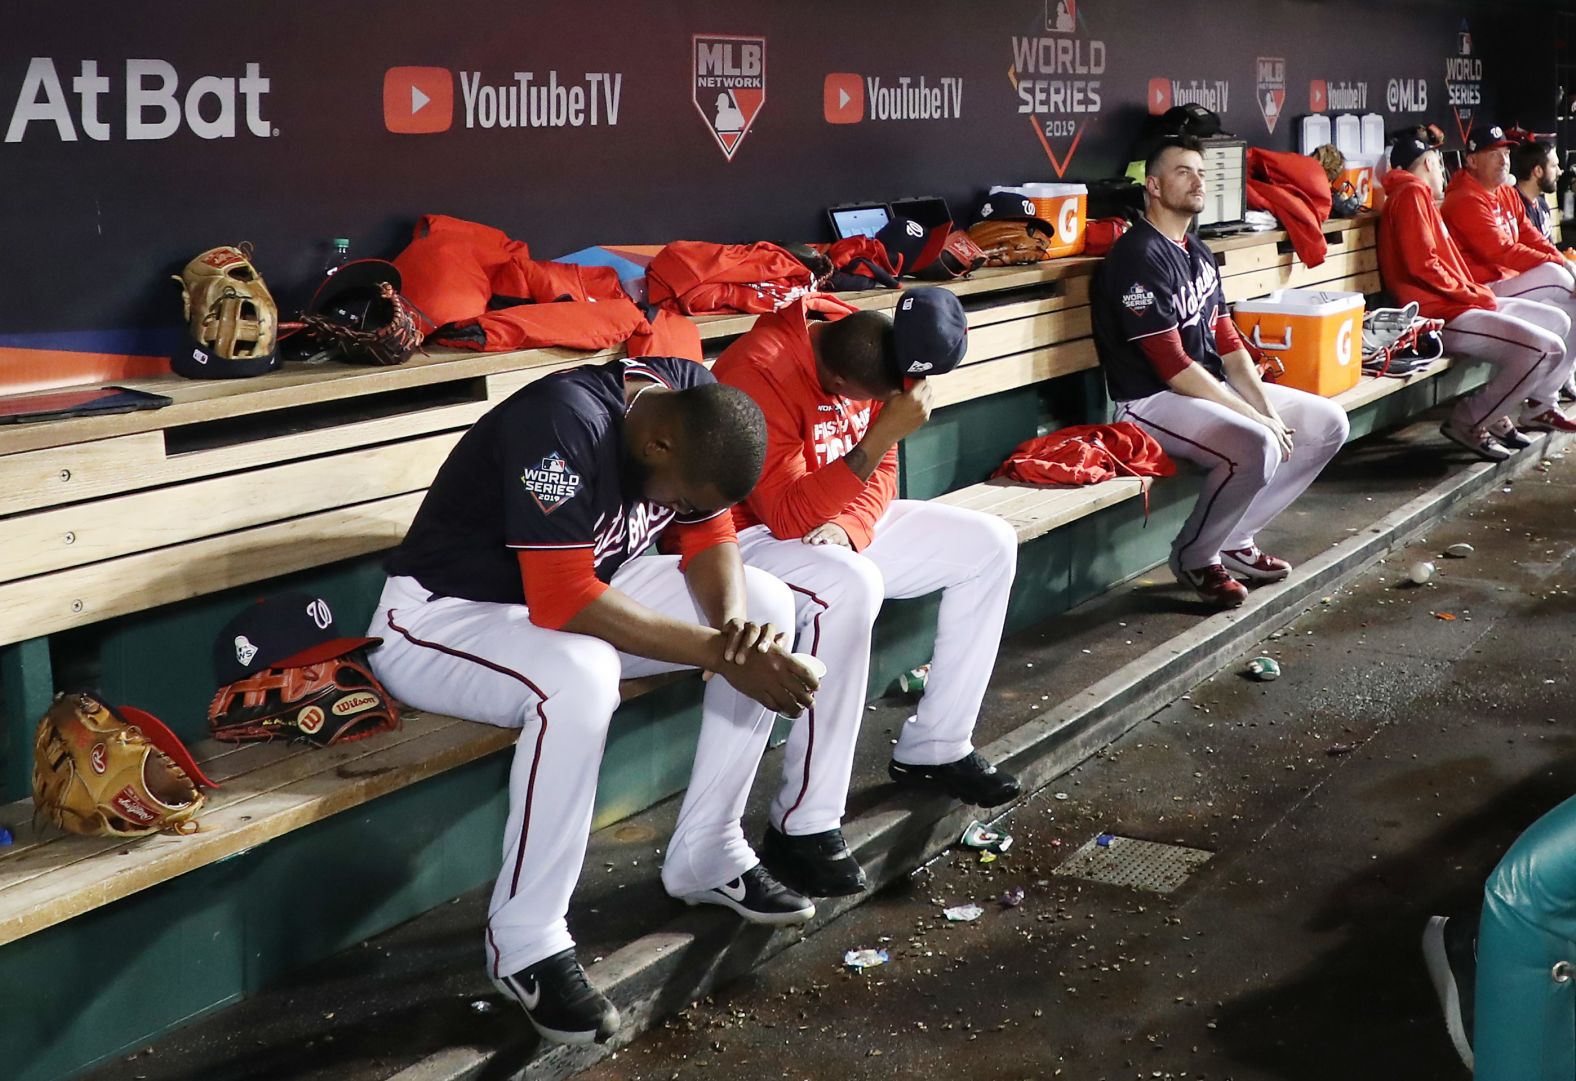 Washington players react in the dugout during the ninth inning of Game 5. The Nationals lost 7-1 to fall behind three games to two. They lost all three of their home games, scoring only one run in each.